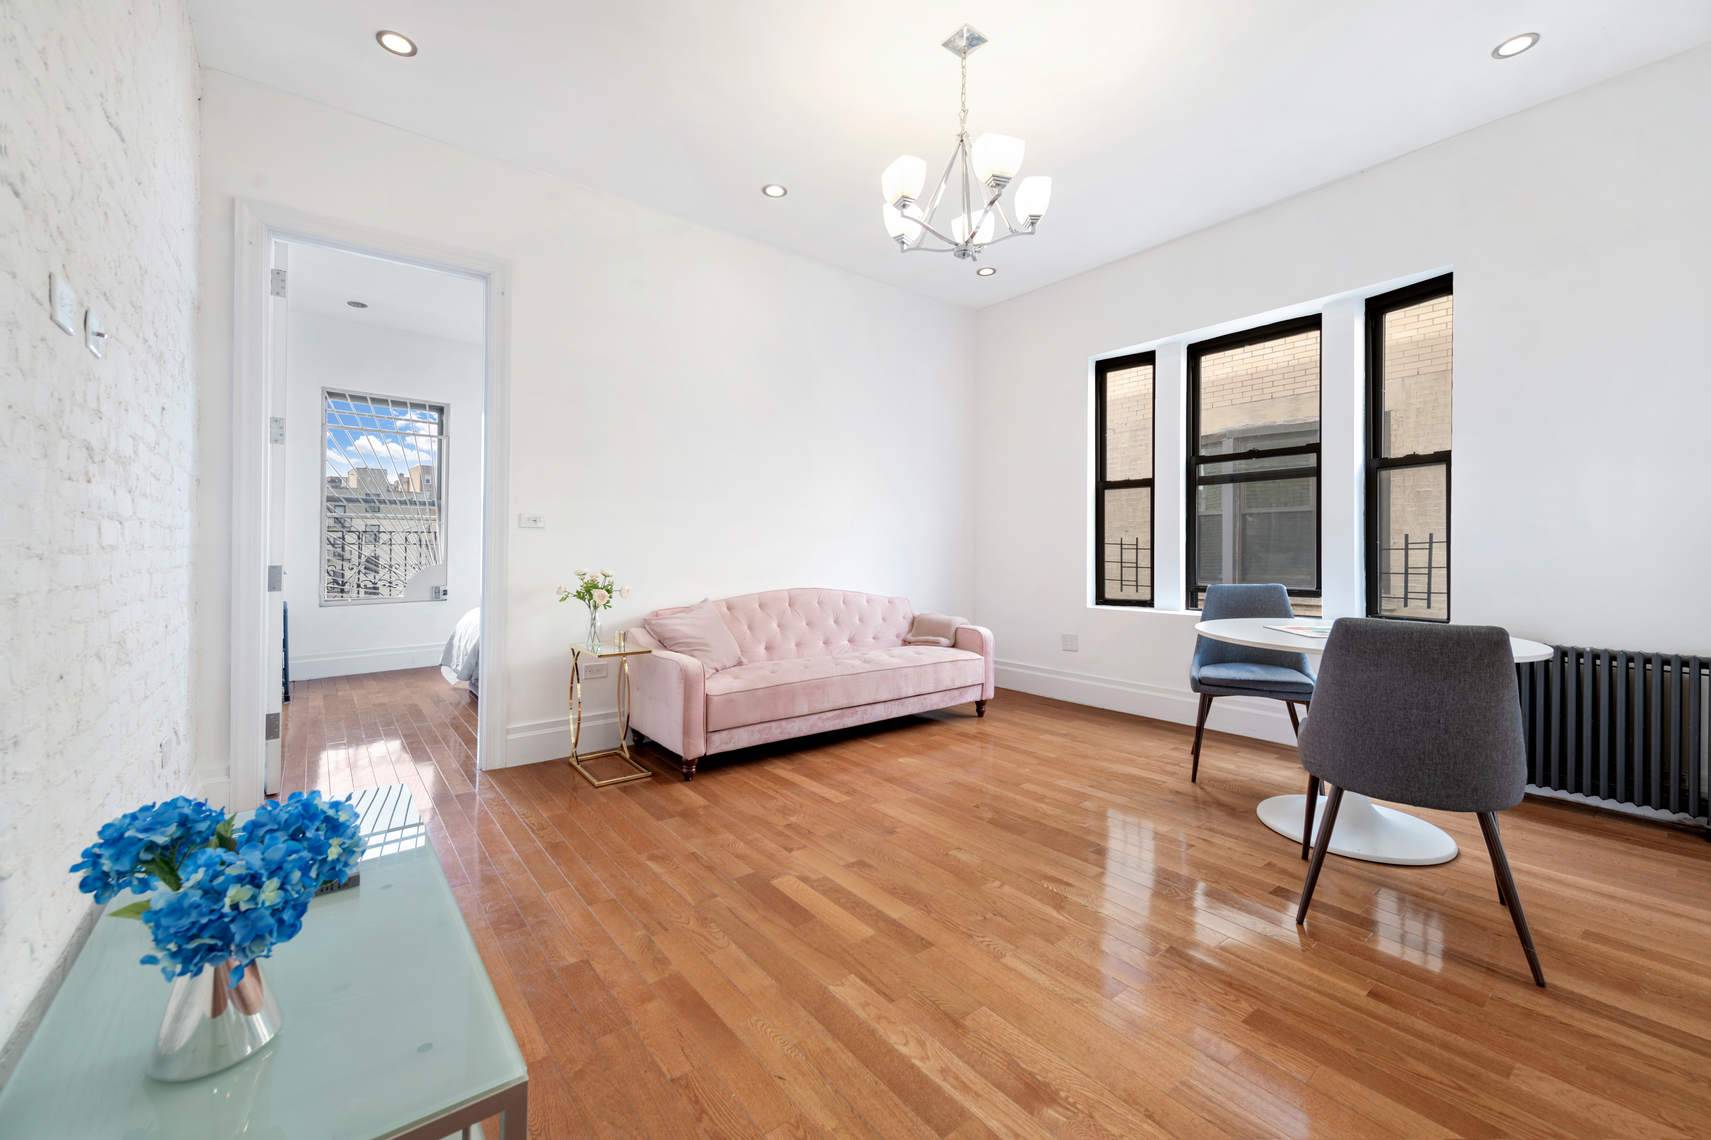 New Price... Dripping with charm and drenched with natural light, your quintessential home in Upper Manhattan awaits you in The Belford.